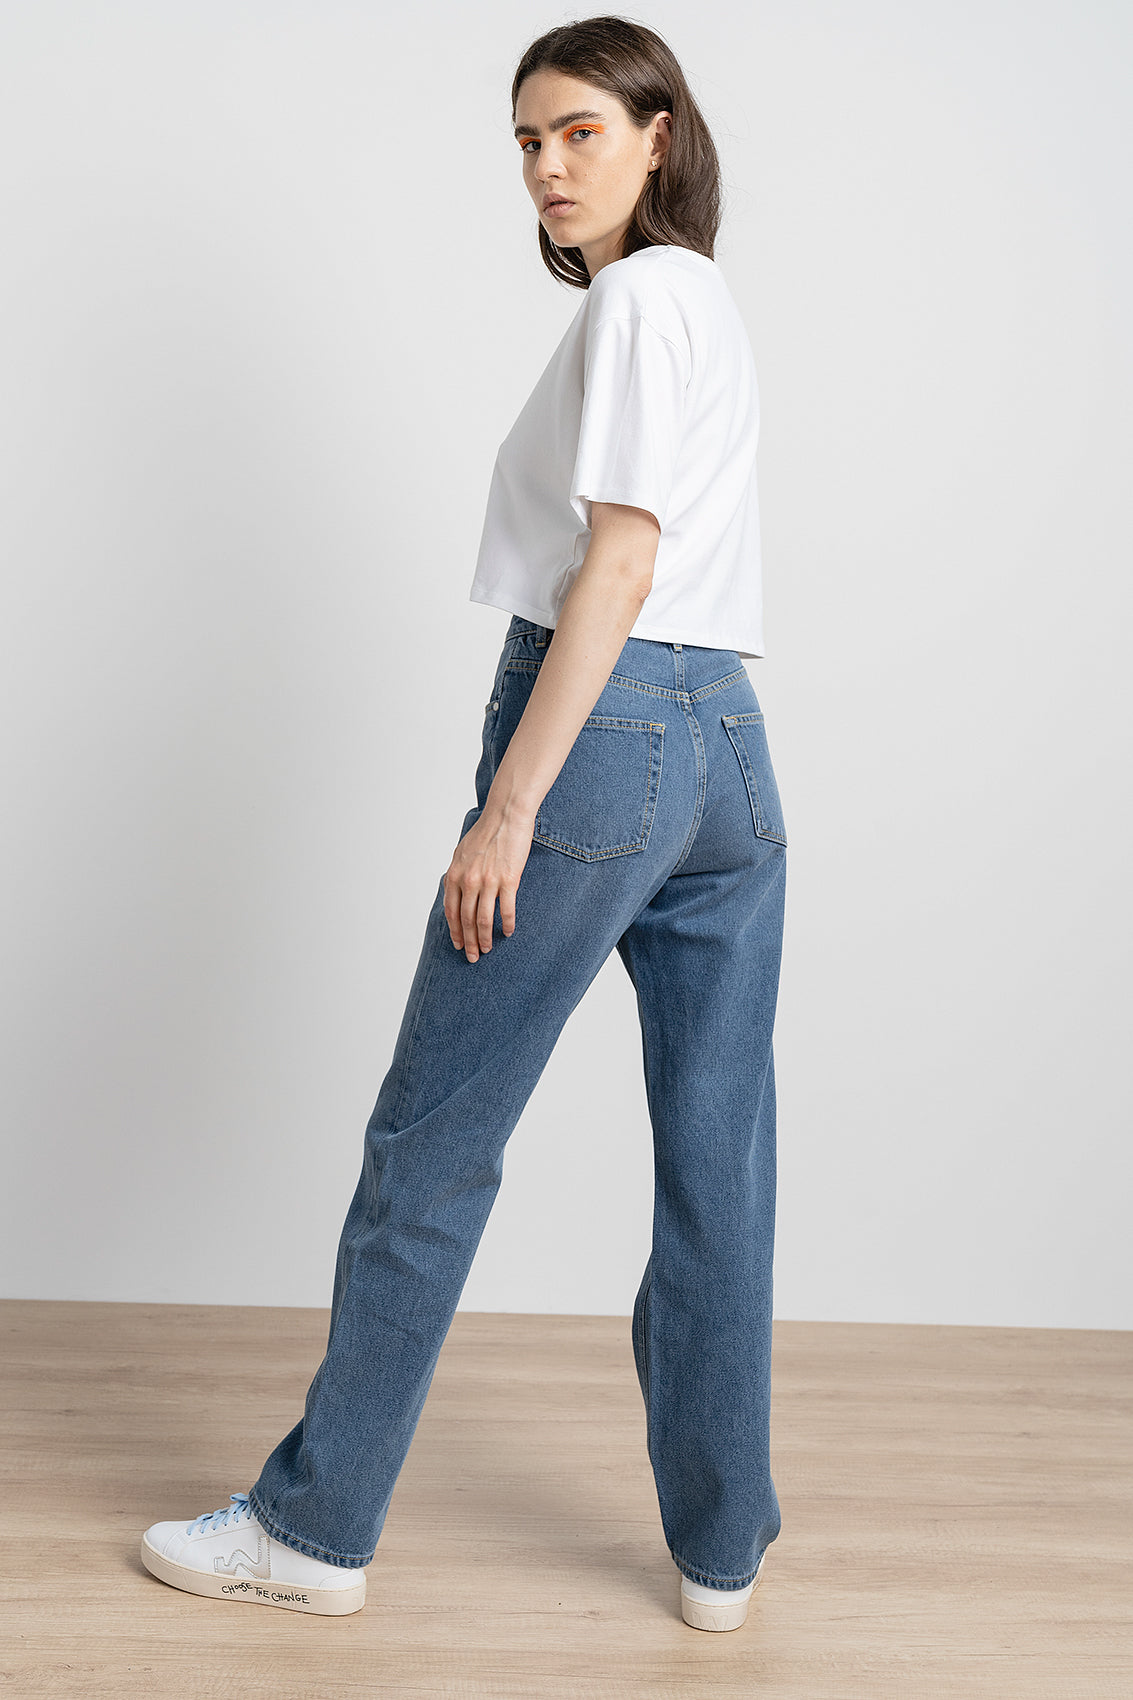 non tapered jeans